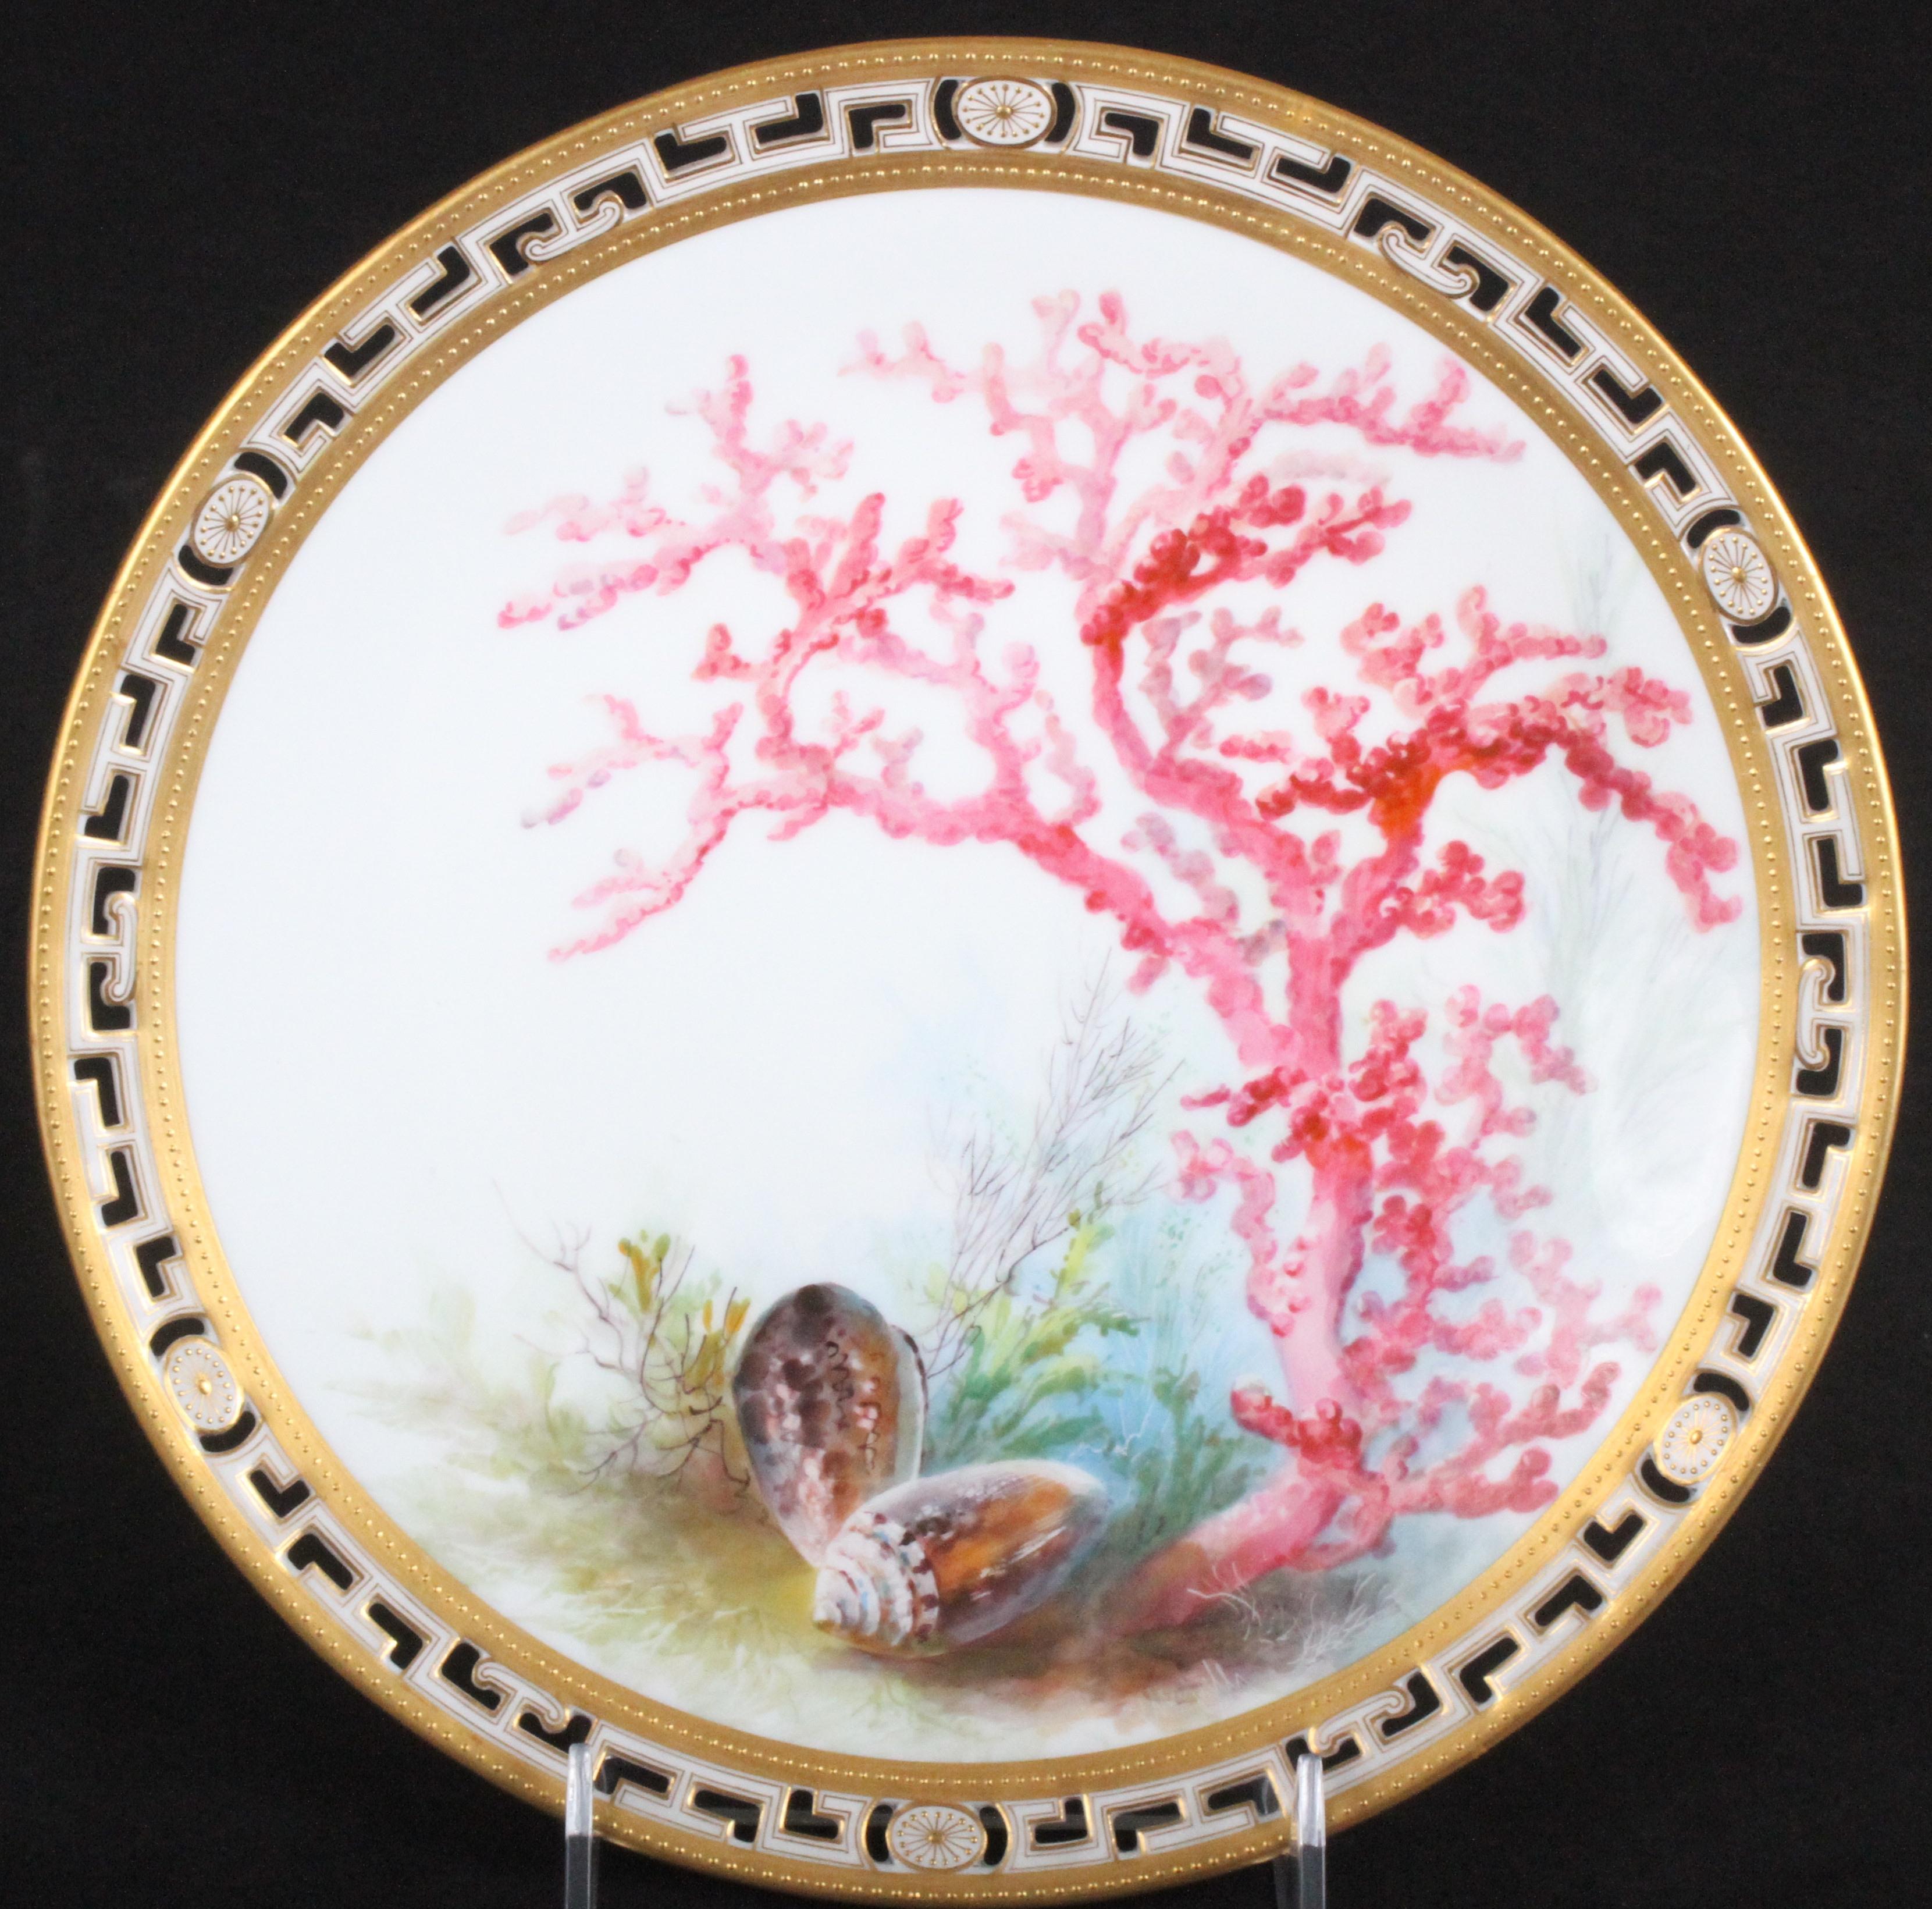 Here is a wonderful set of 13 hand painted cabinet plates by artist William Mussill from Minton, Stoke-On-Trent, Staffordshire, England. Each plate features a unique rendering of shells or coral in a naturalistic and colorful tropical setting. The